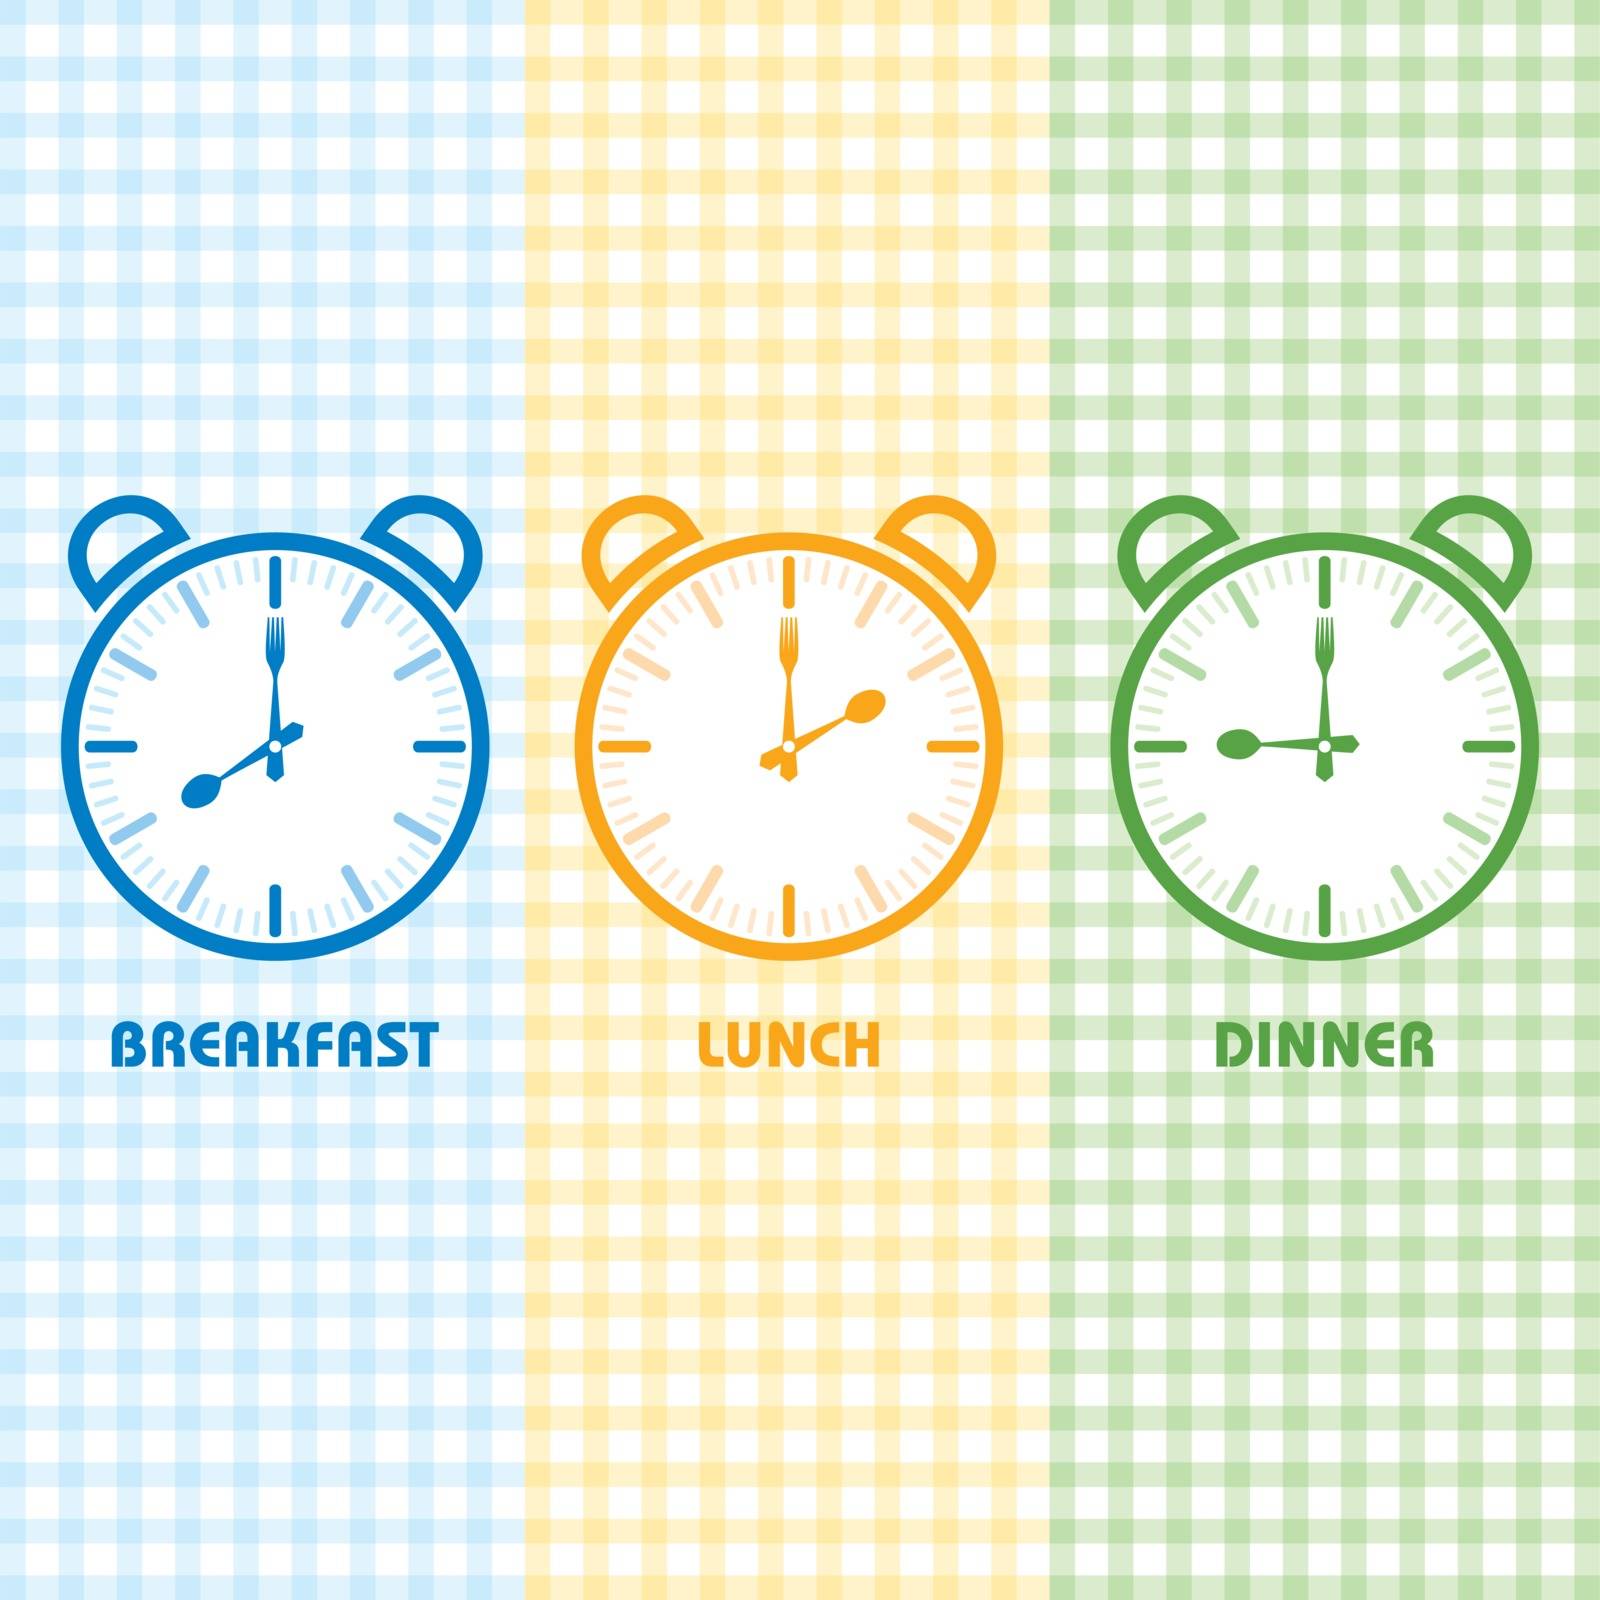 Breakfast Lunch and Dinner time stock vector